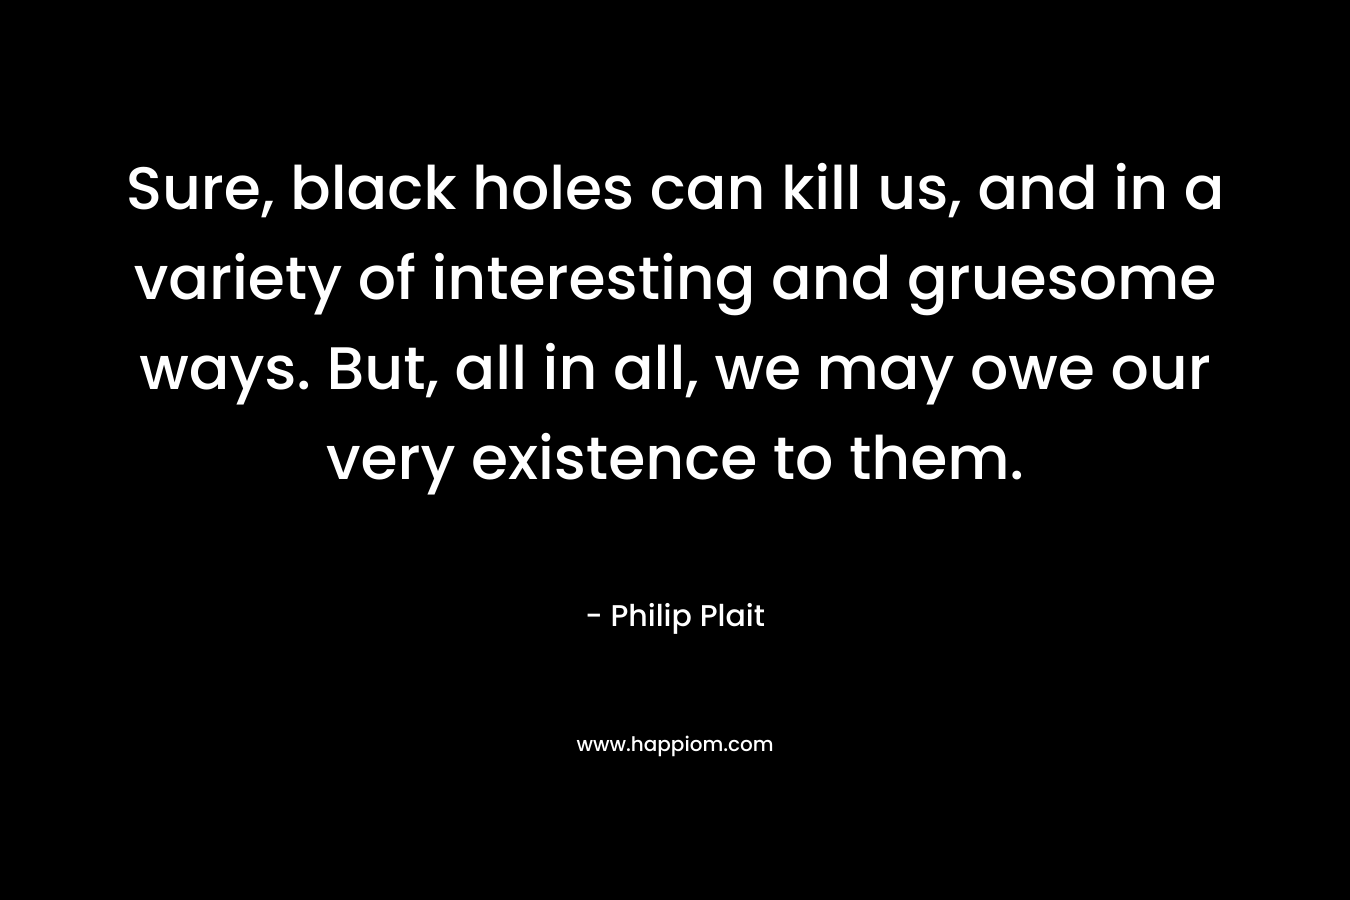 Sure, black holes can kill us, and in a variety of interesting and gruesome ways. But, all in all, we may owe our very existence to them. – Philip Plait